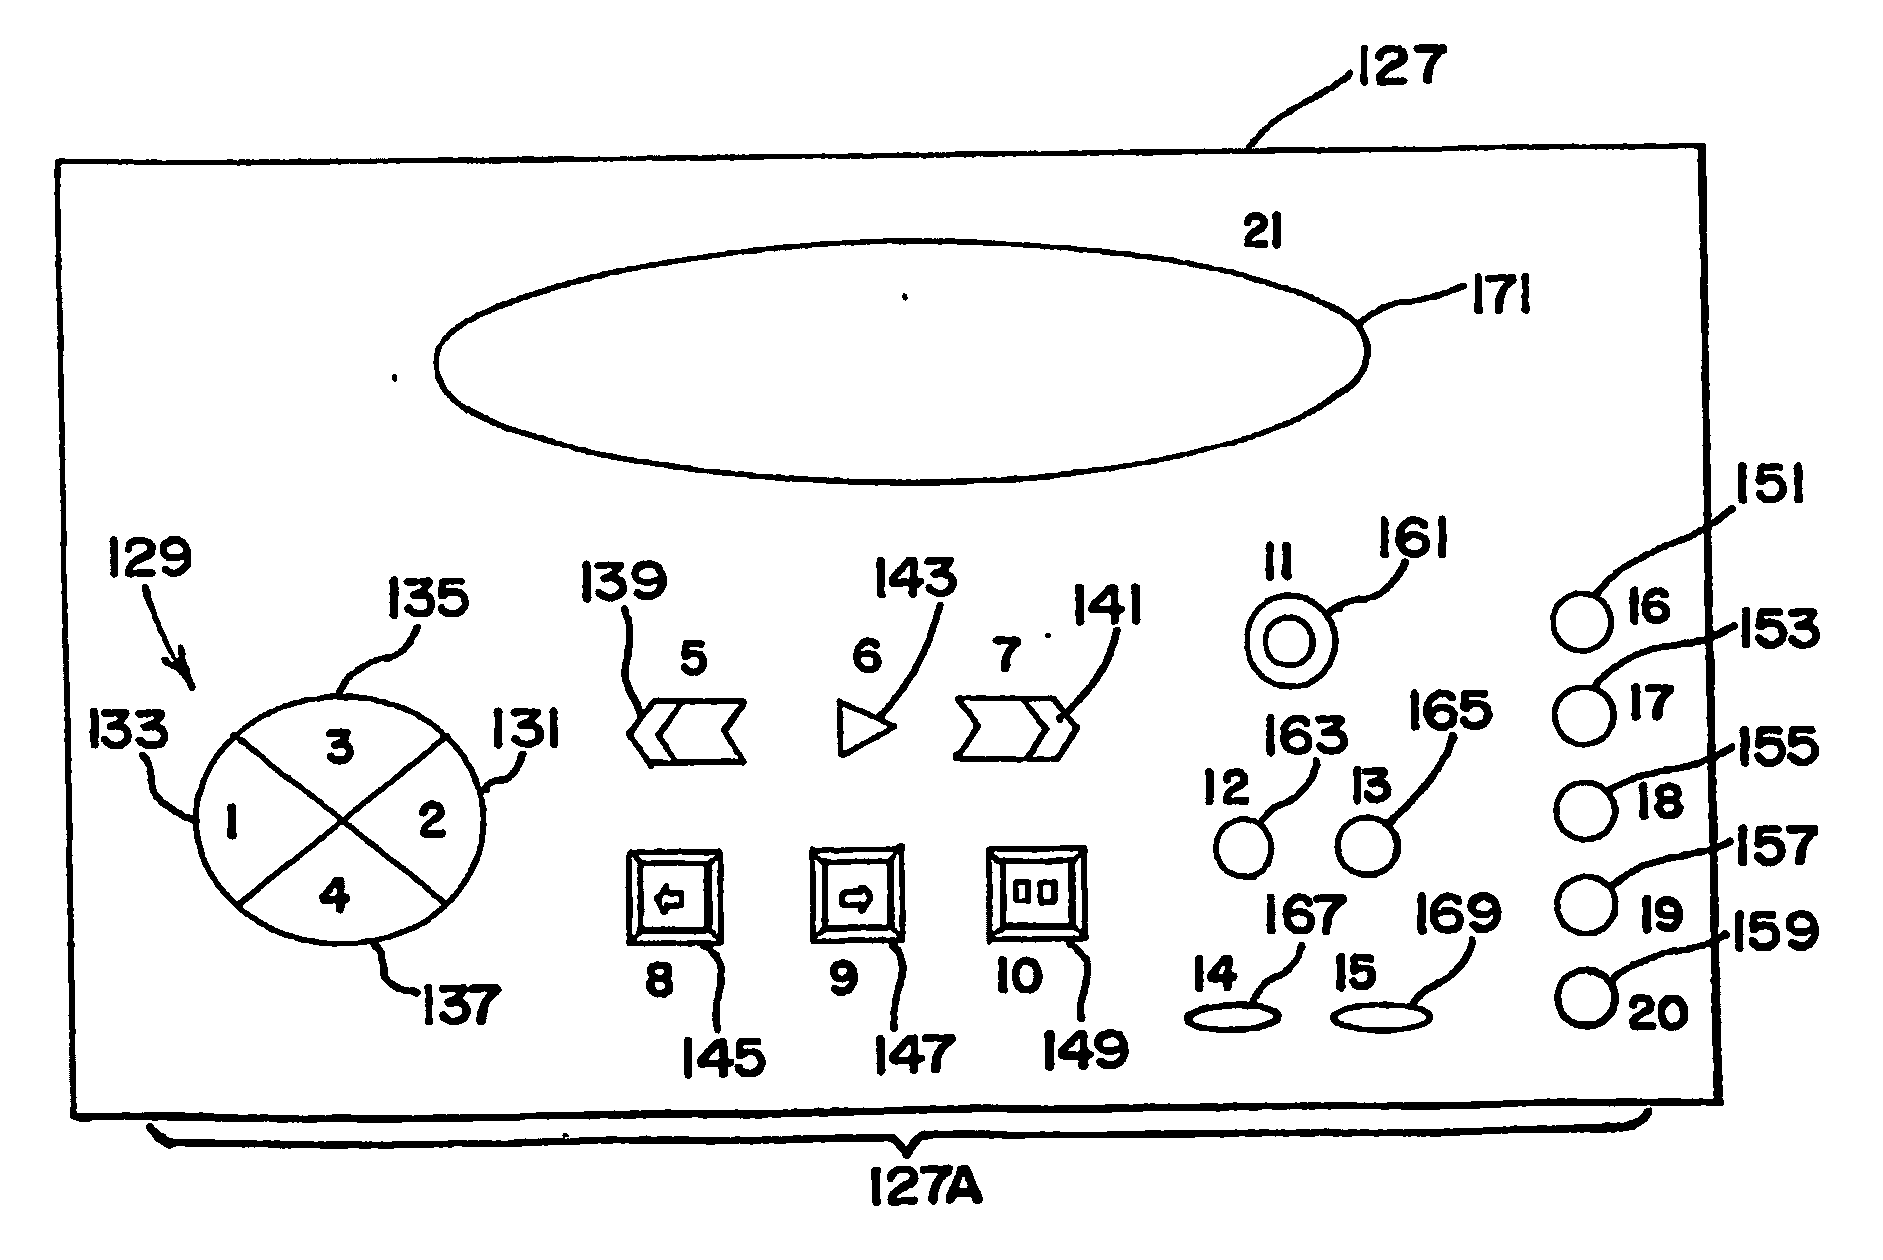 Content communication system and methods